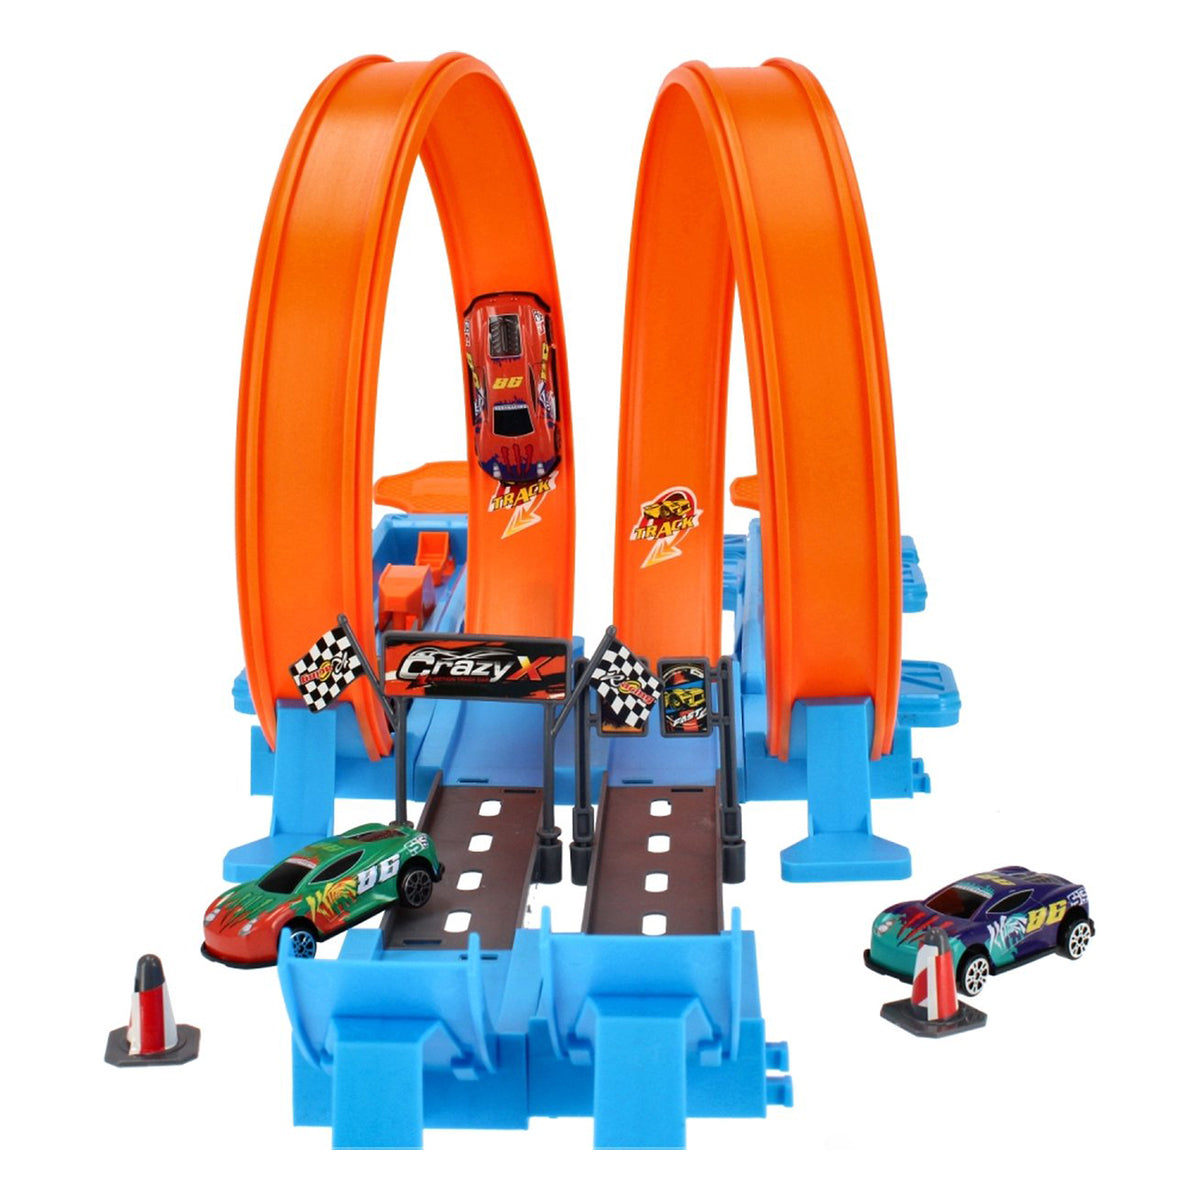 <tc>Ariko</tc> Double track race track - 40 parts - two loupes - two lounchers in 4 gears - 3 in 1 - 4 cars - with points system